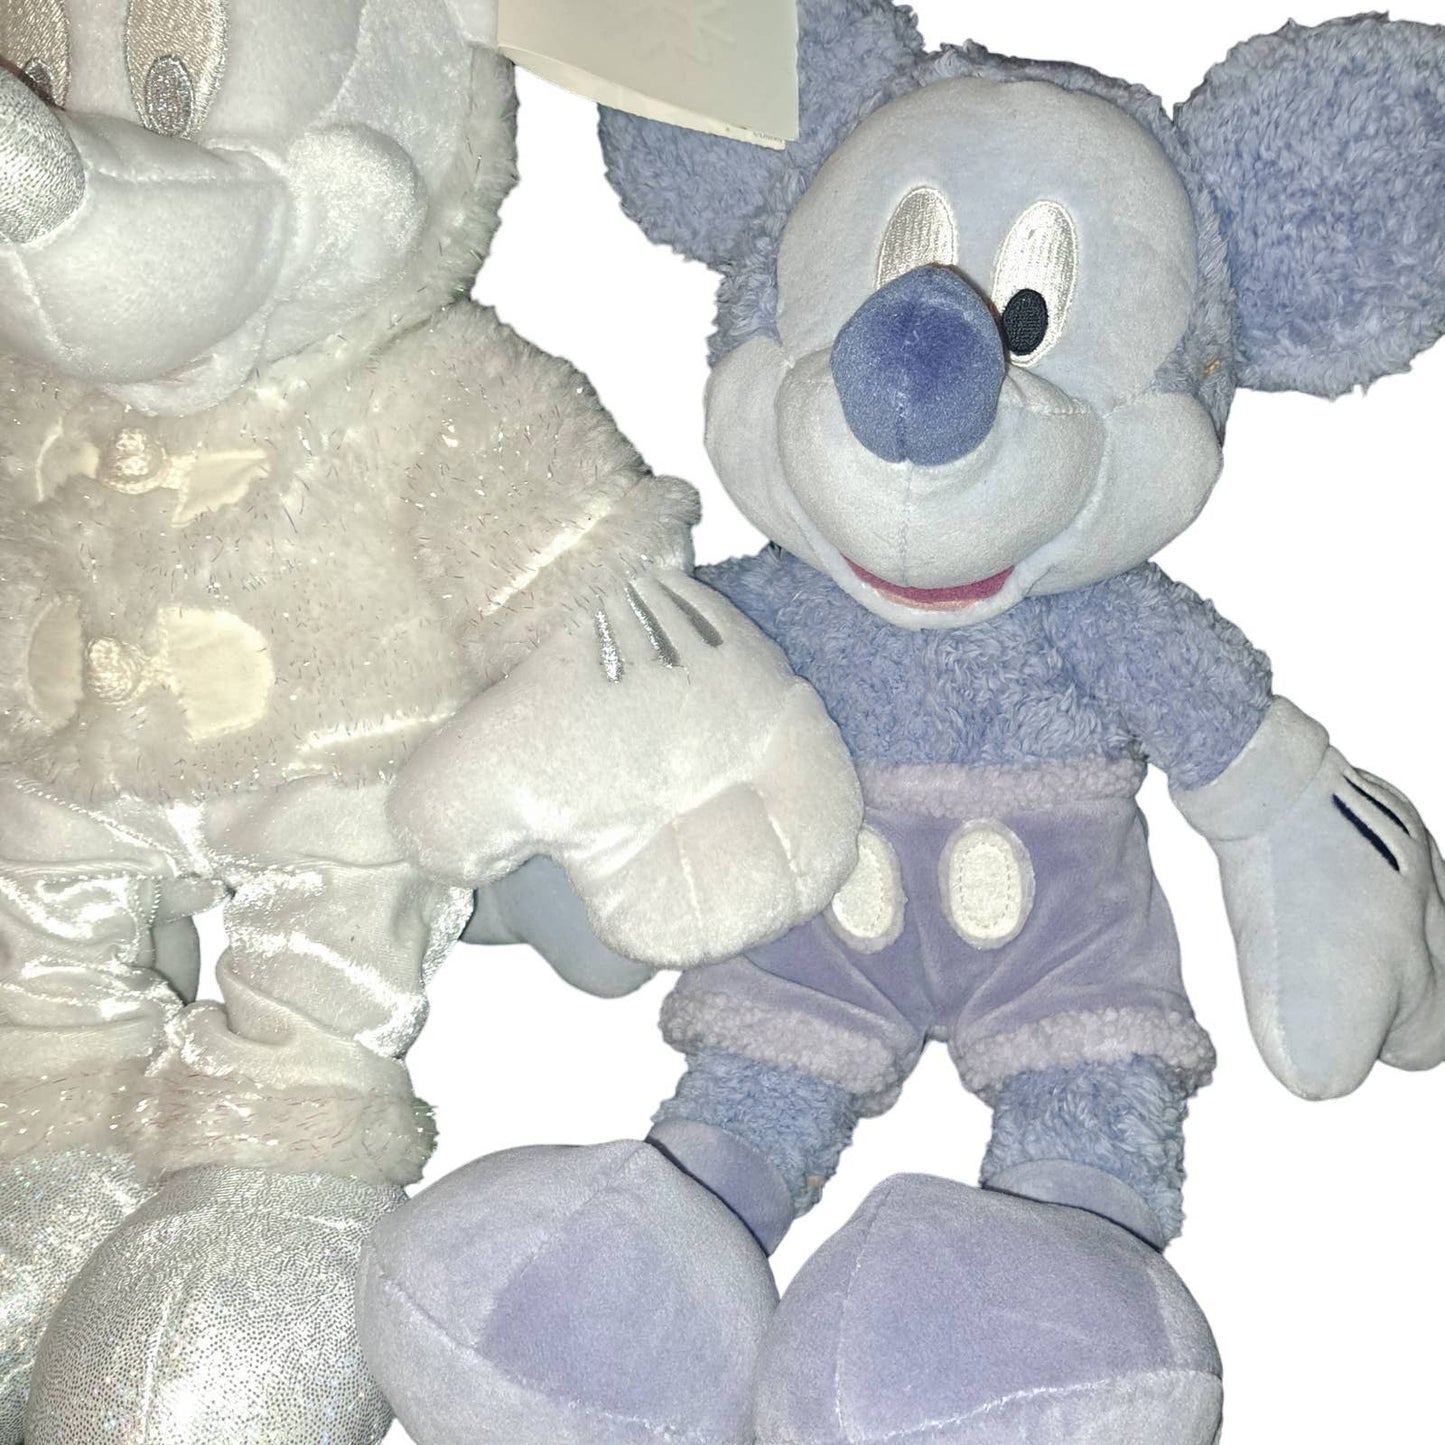 THREE Plush Pastel Mickey Mouse Snowflake Pals Each 16 inches tall!